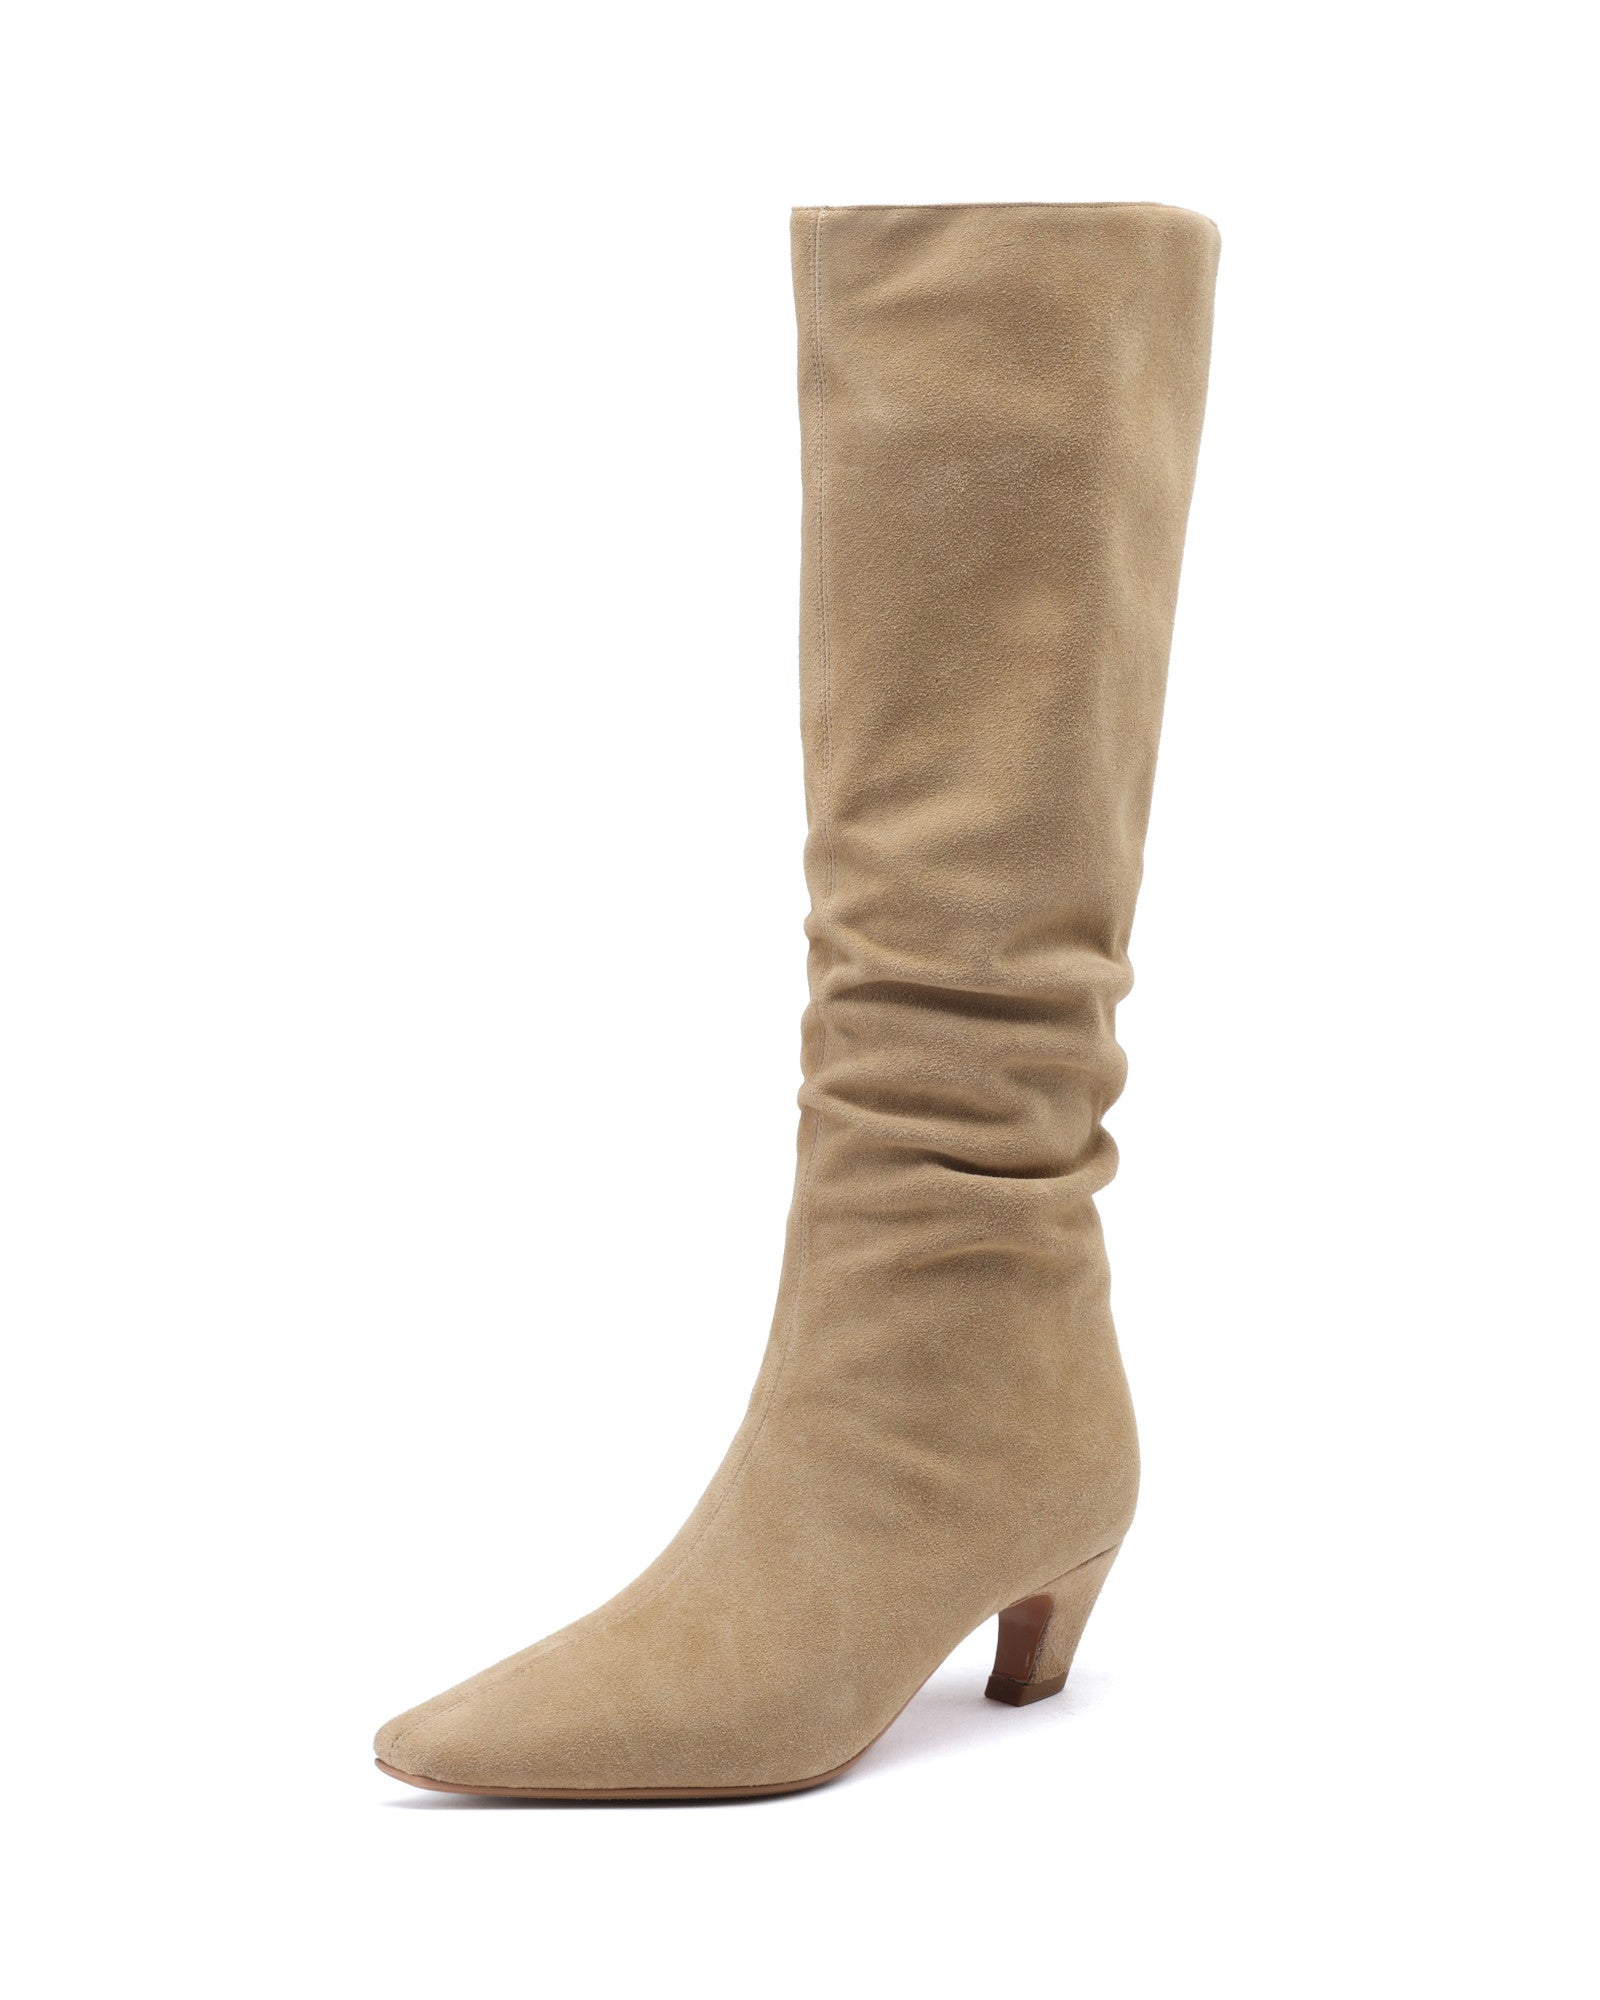 Miolo-suede-knee-high-boots-camel